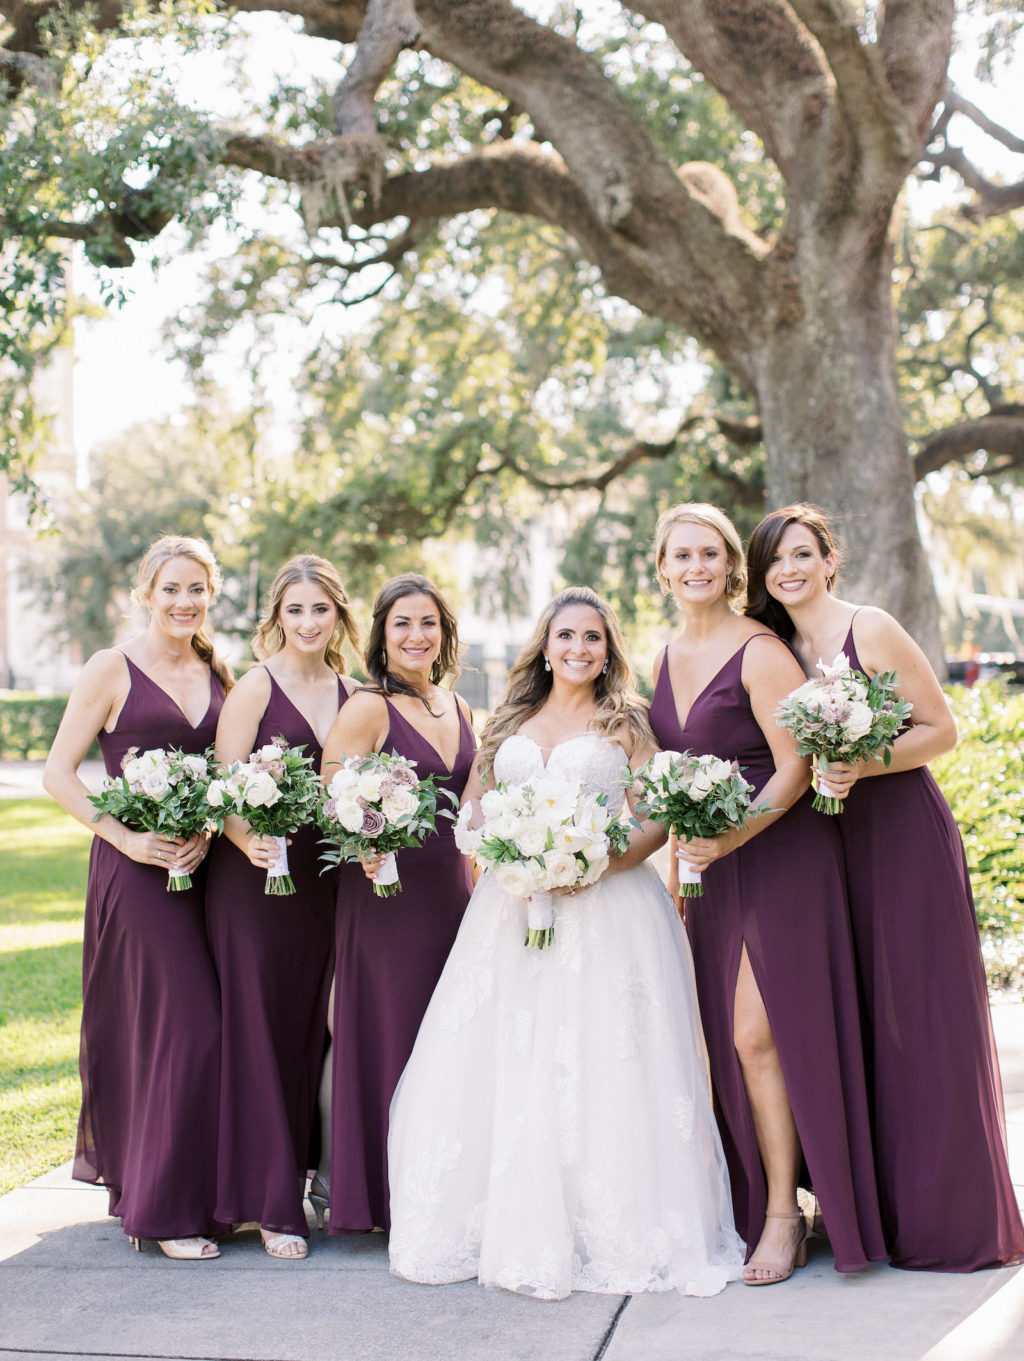 Tampa Bay Traditional Bride Wearing Ballgown Wedding Dress and Bridesmaids in Matching Plum Purple Dresses Holding White Floral Bouquets